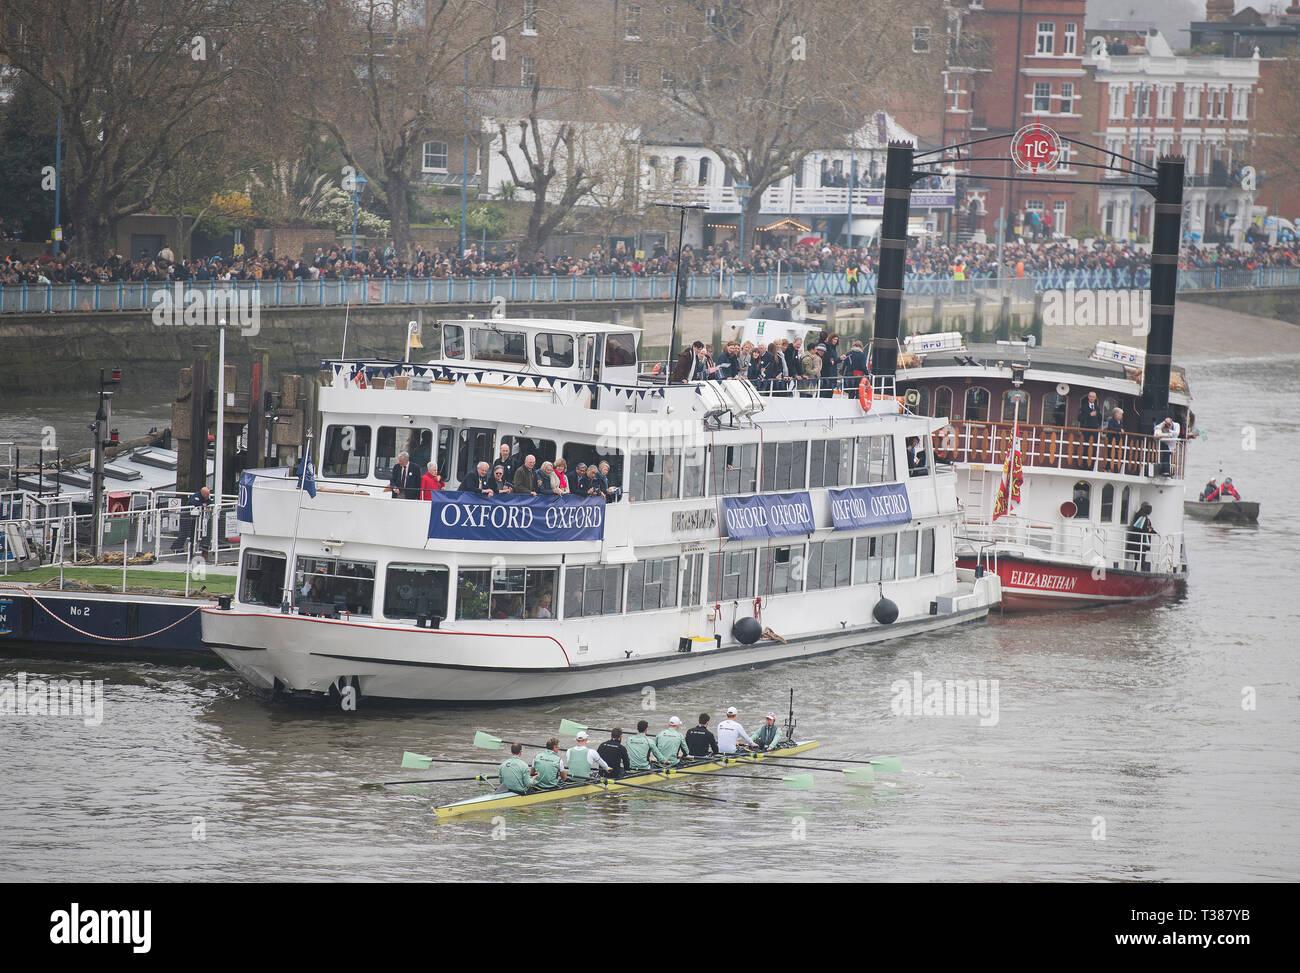 London, UK. 7th April, 2019. The annual Boat Race between Oxford and Cambridge University crews takes place on the 6.8 km River Thames Championship Course from Putney to Mortlake. Image: Cambridge Mens Blue Boat Crew: Dave Bell, James Cracknell, Grant Bitler, Dara Alizadeh, Callum Sullivan, Sam Hookway, Freddie Davidson, Natan Wegrzycki-Szymczyk (Stroke), Matthew Holland (Cox), making their way downstream before race start and passing crowds lining Putney riverside. Credit: Malcolm Park/Alamy Live News. Stock Photo